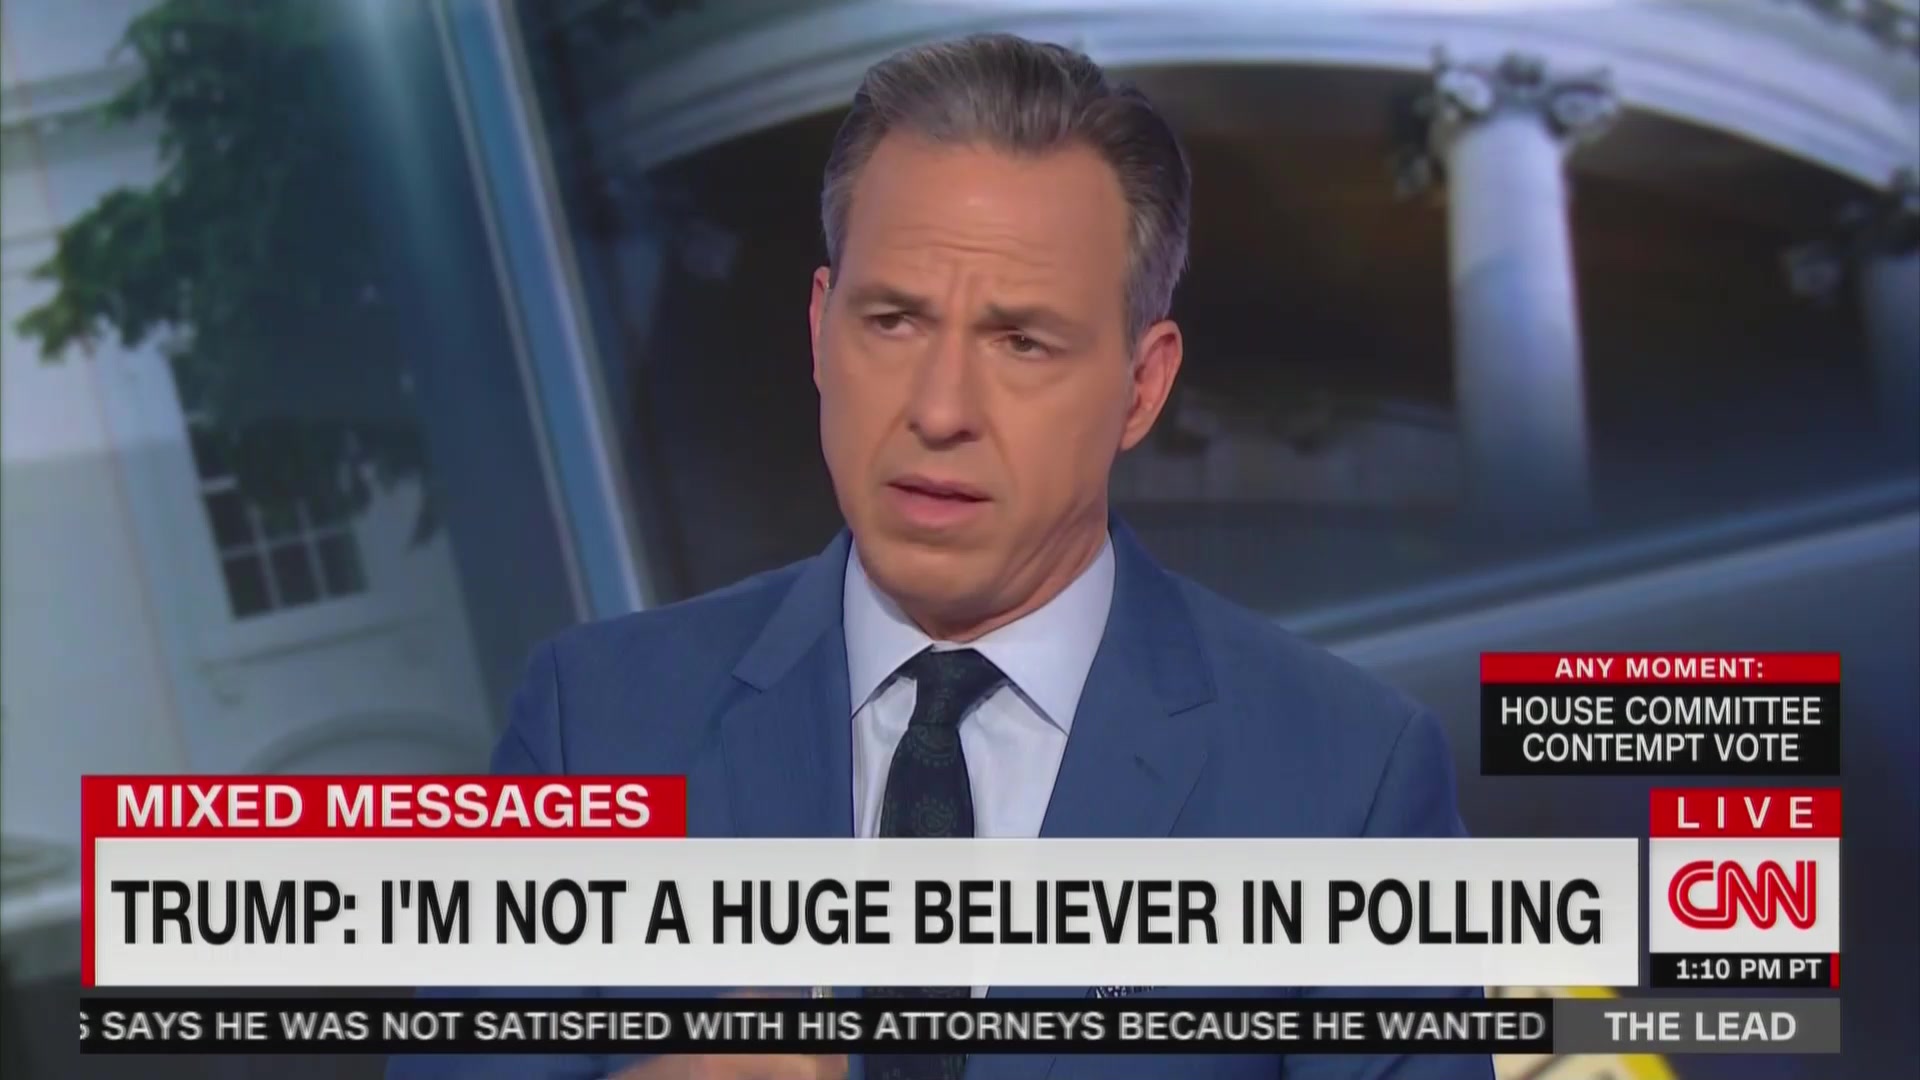 ‘That’s a Lie’: Tapper Calls Out Trump for Claiming Mueller Report Shows He ‘Rebuffed’ Russia